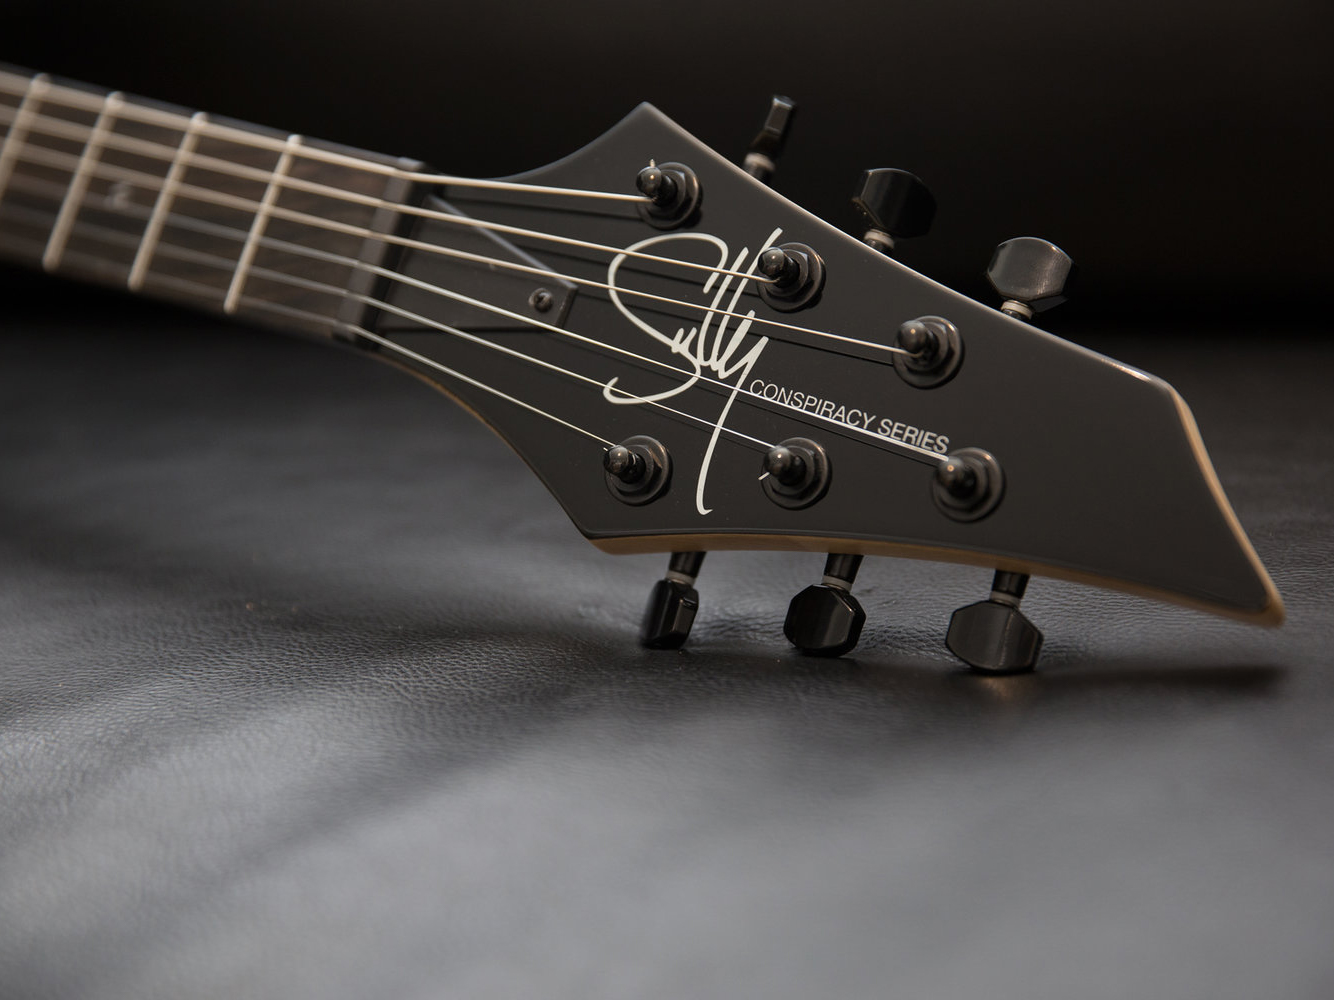 Sully Conspiracy Series headstock